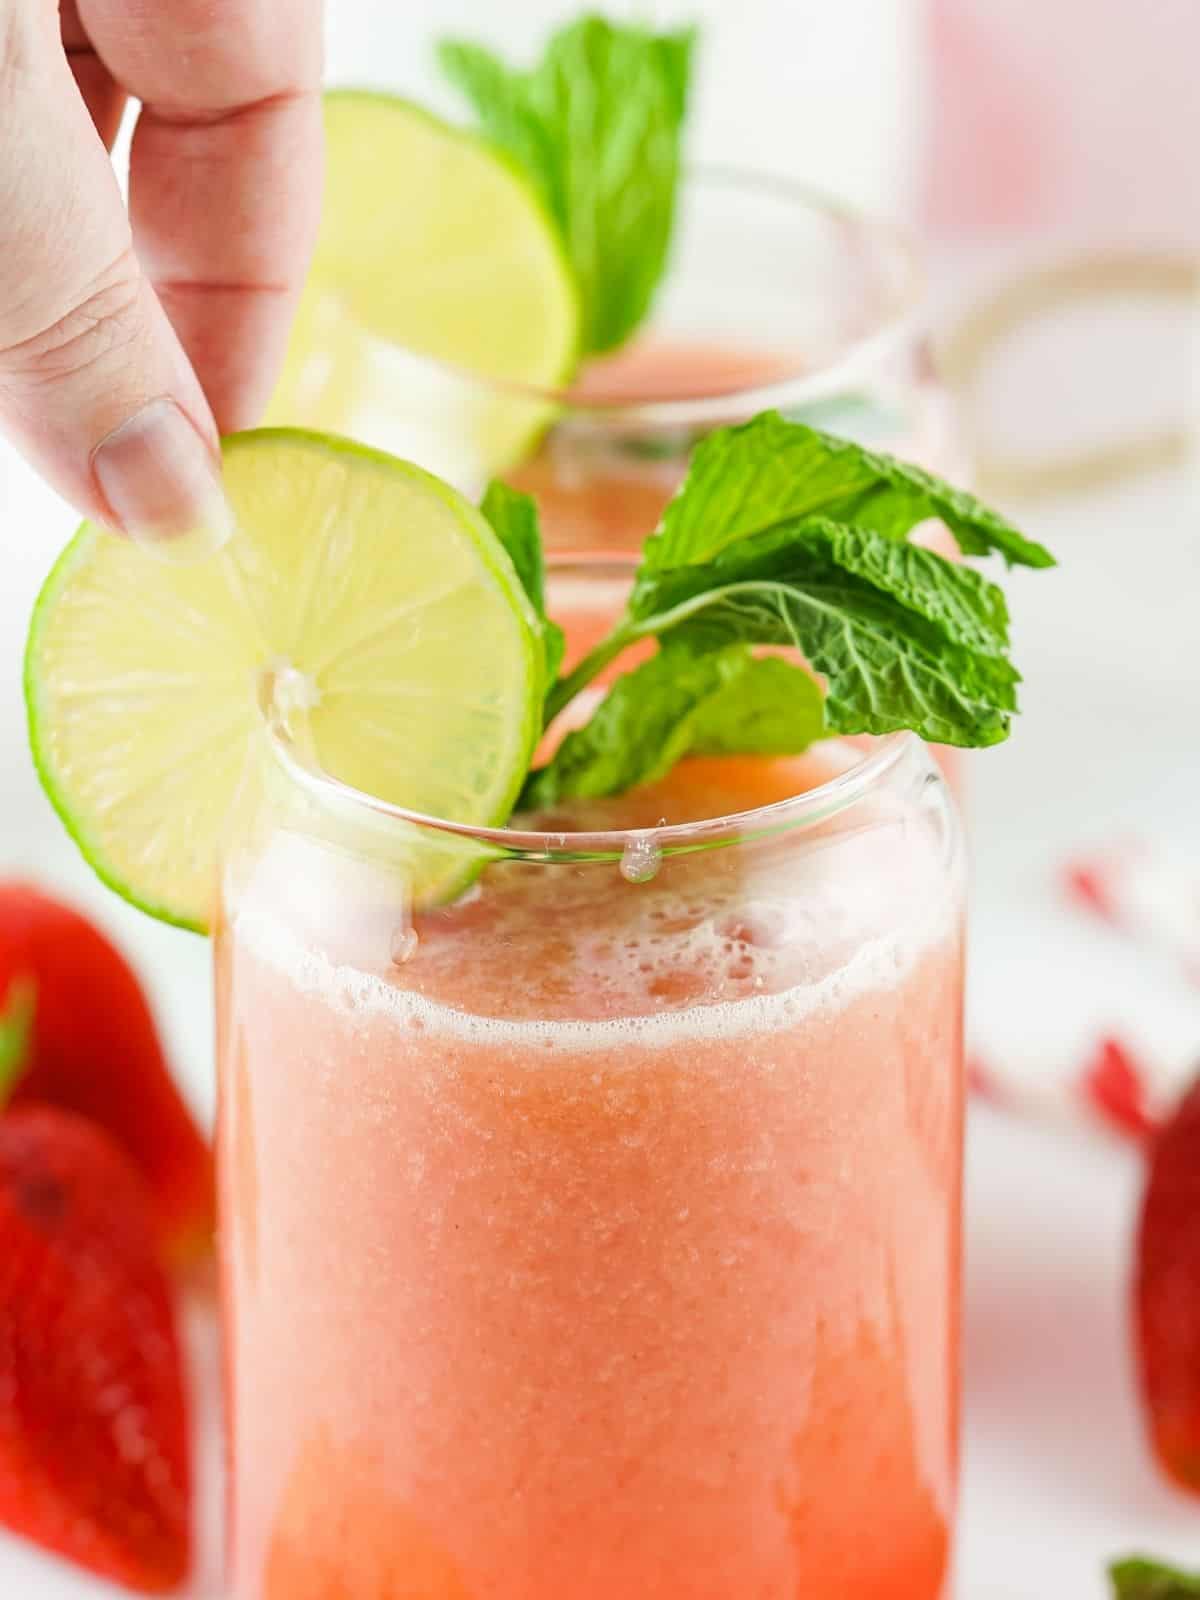 Adding lime slice to glass of strawberry water.